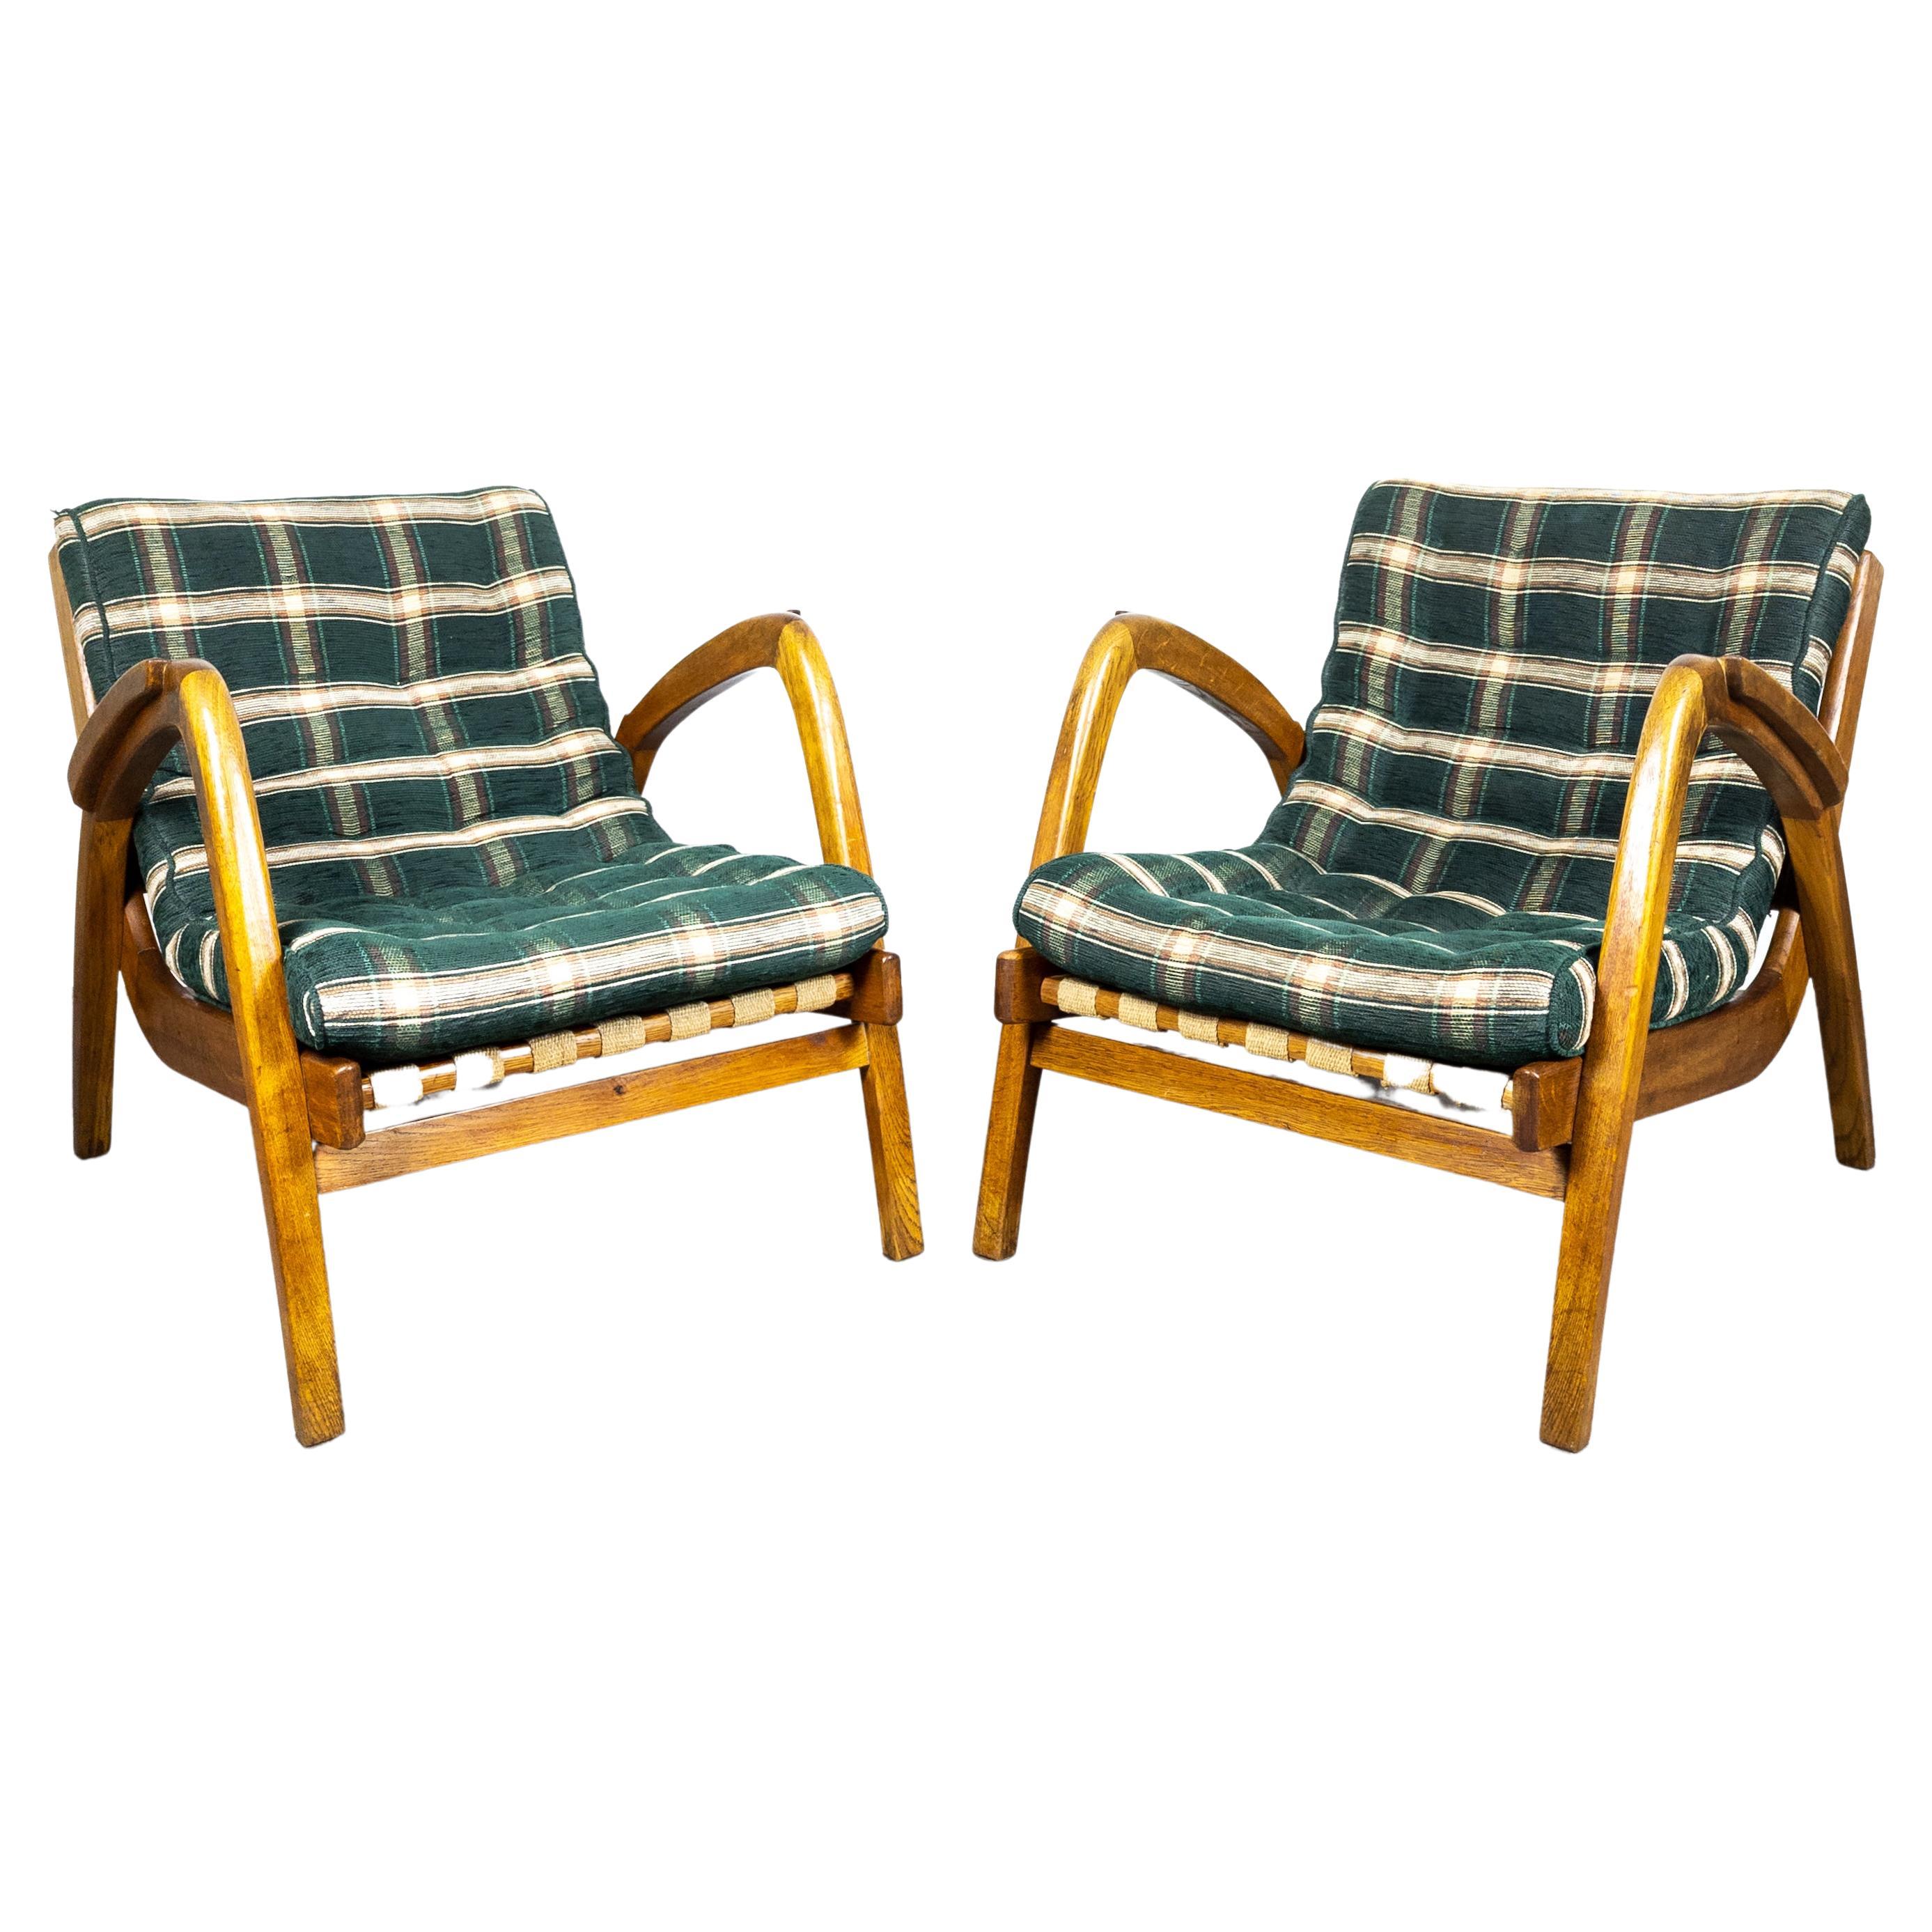 Pair of rare and unique armchairs designed by Jan Vanek for Krásná Jizba, former Czechoslovakia in 1940´s. It features a woven canvas seat and beech wood frame. In very good original condition with beautiful patina on the wood. Both the wood and the